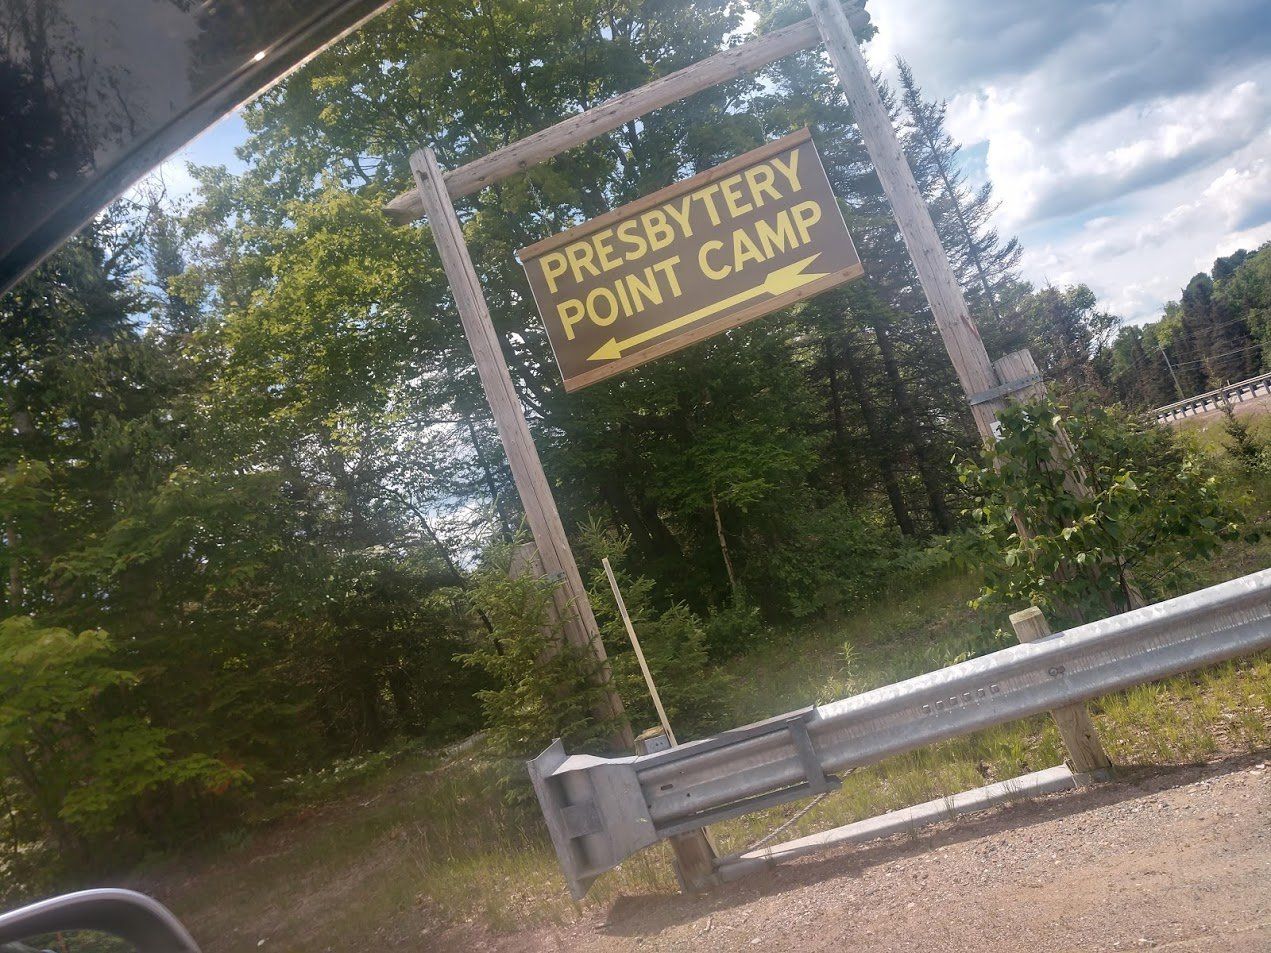 Eyelash Extensions — Presbytery Point Camp Signage in Marie, MI